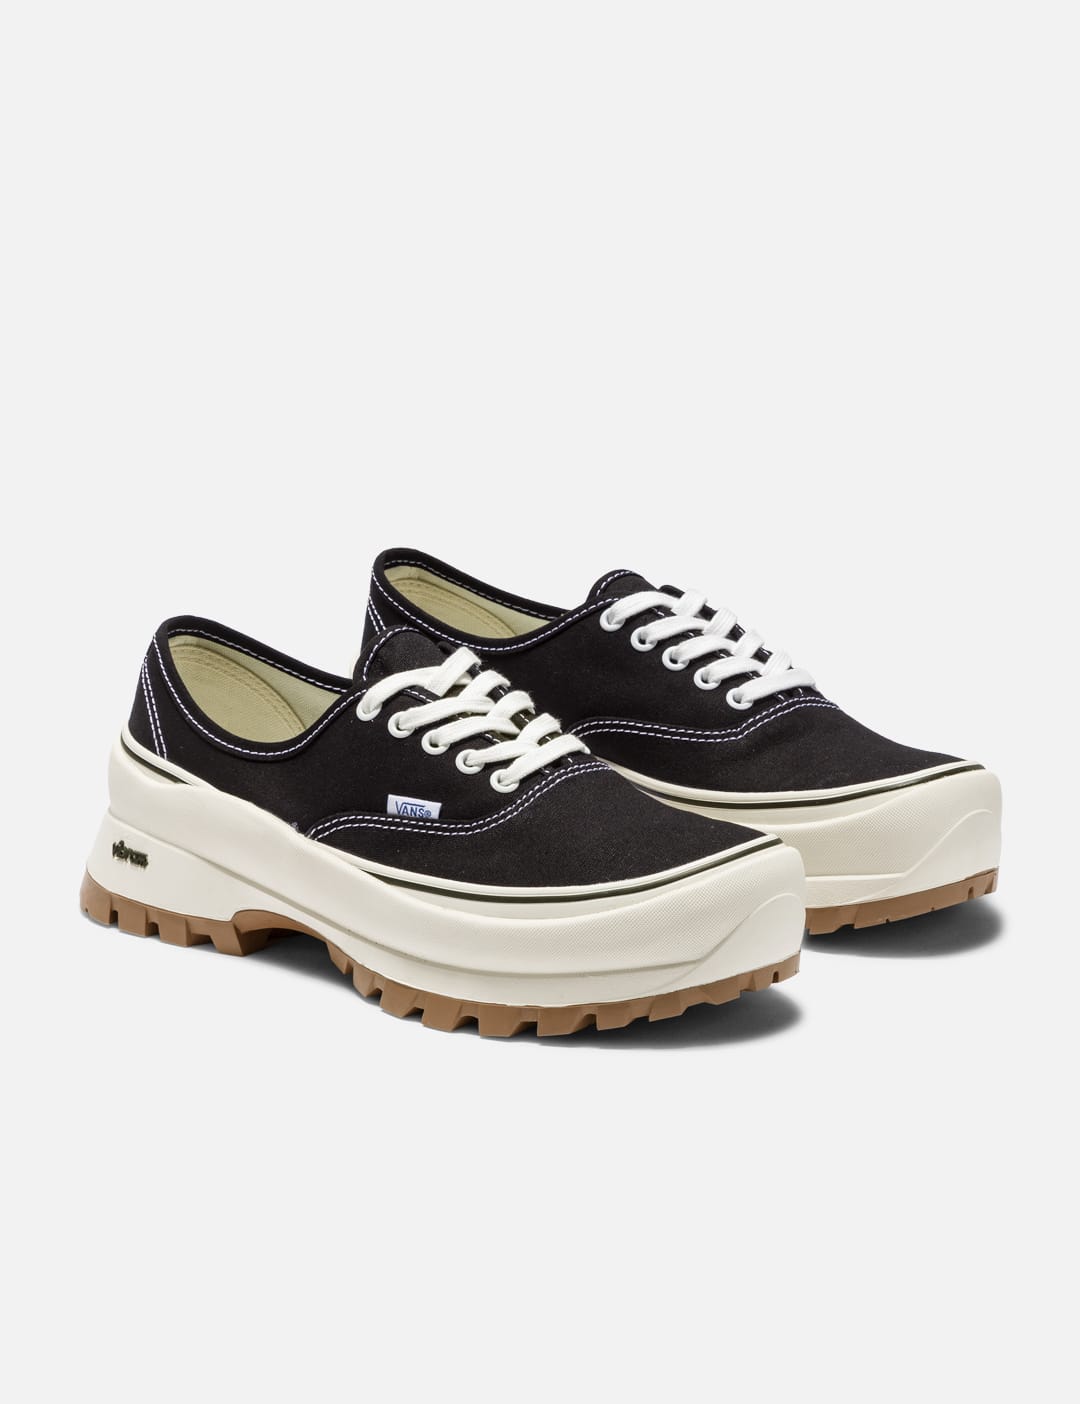 Vans - AUTHENTIC VIBRAM DX | HBX - Globally Curated Fashion and